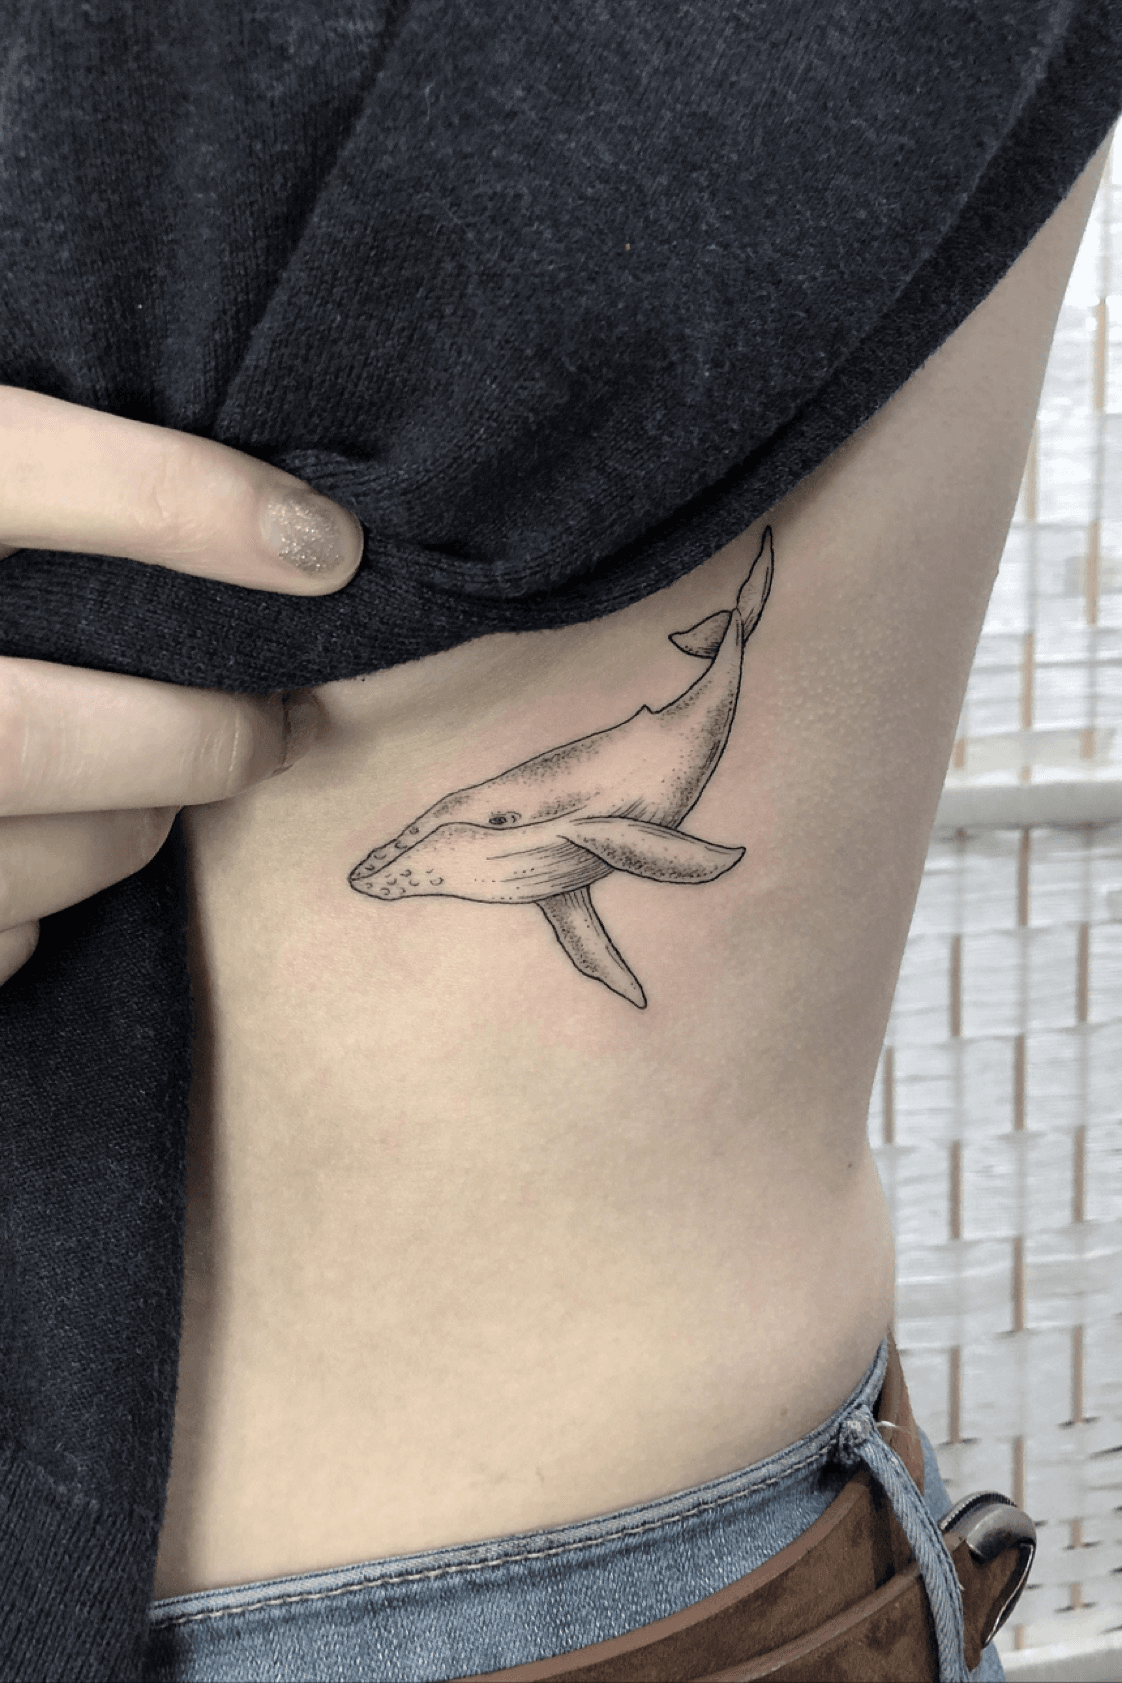 Official Tumblr page for Tattoofilter  Whale tattoos Mini tattoos Small  tattoos